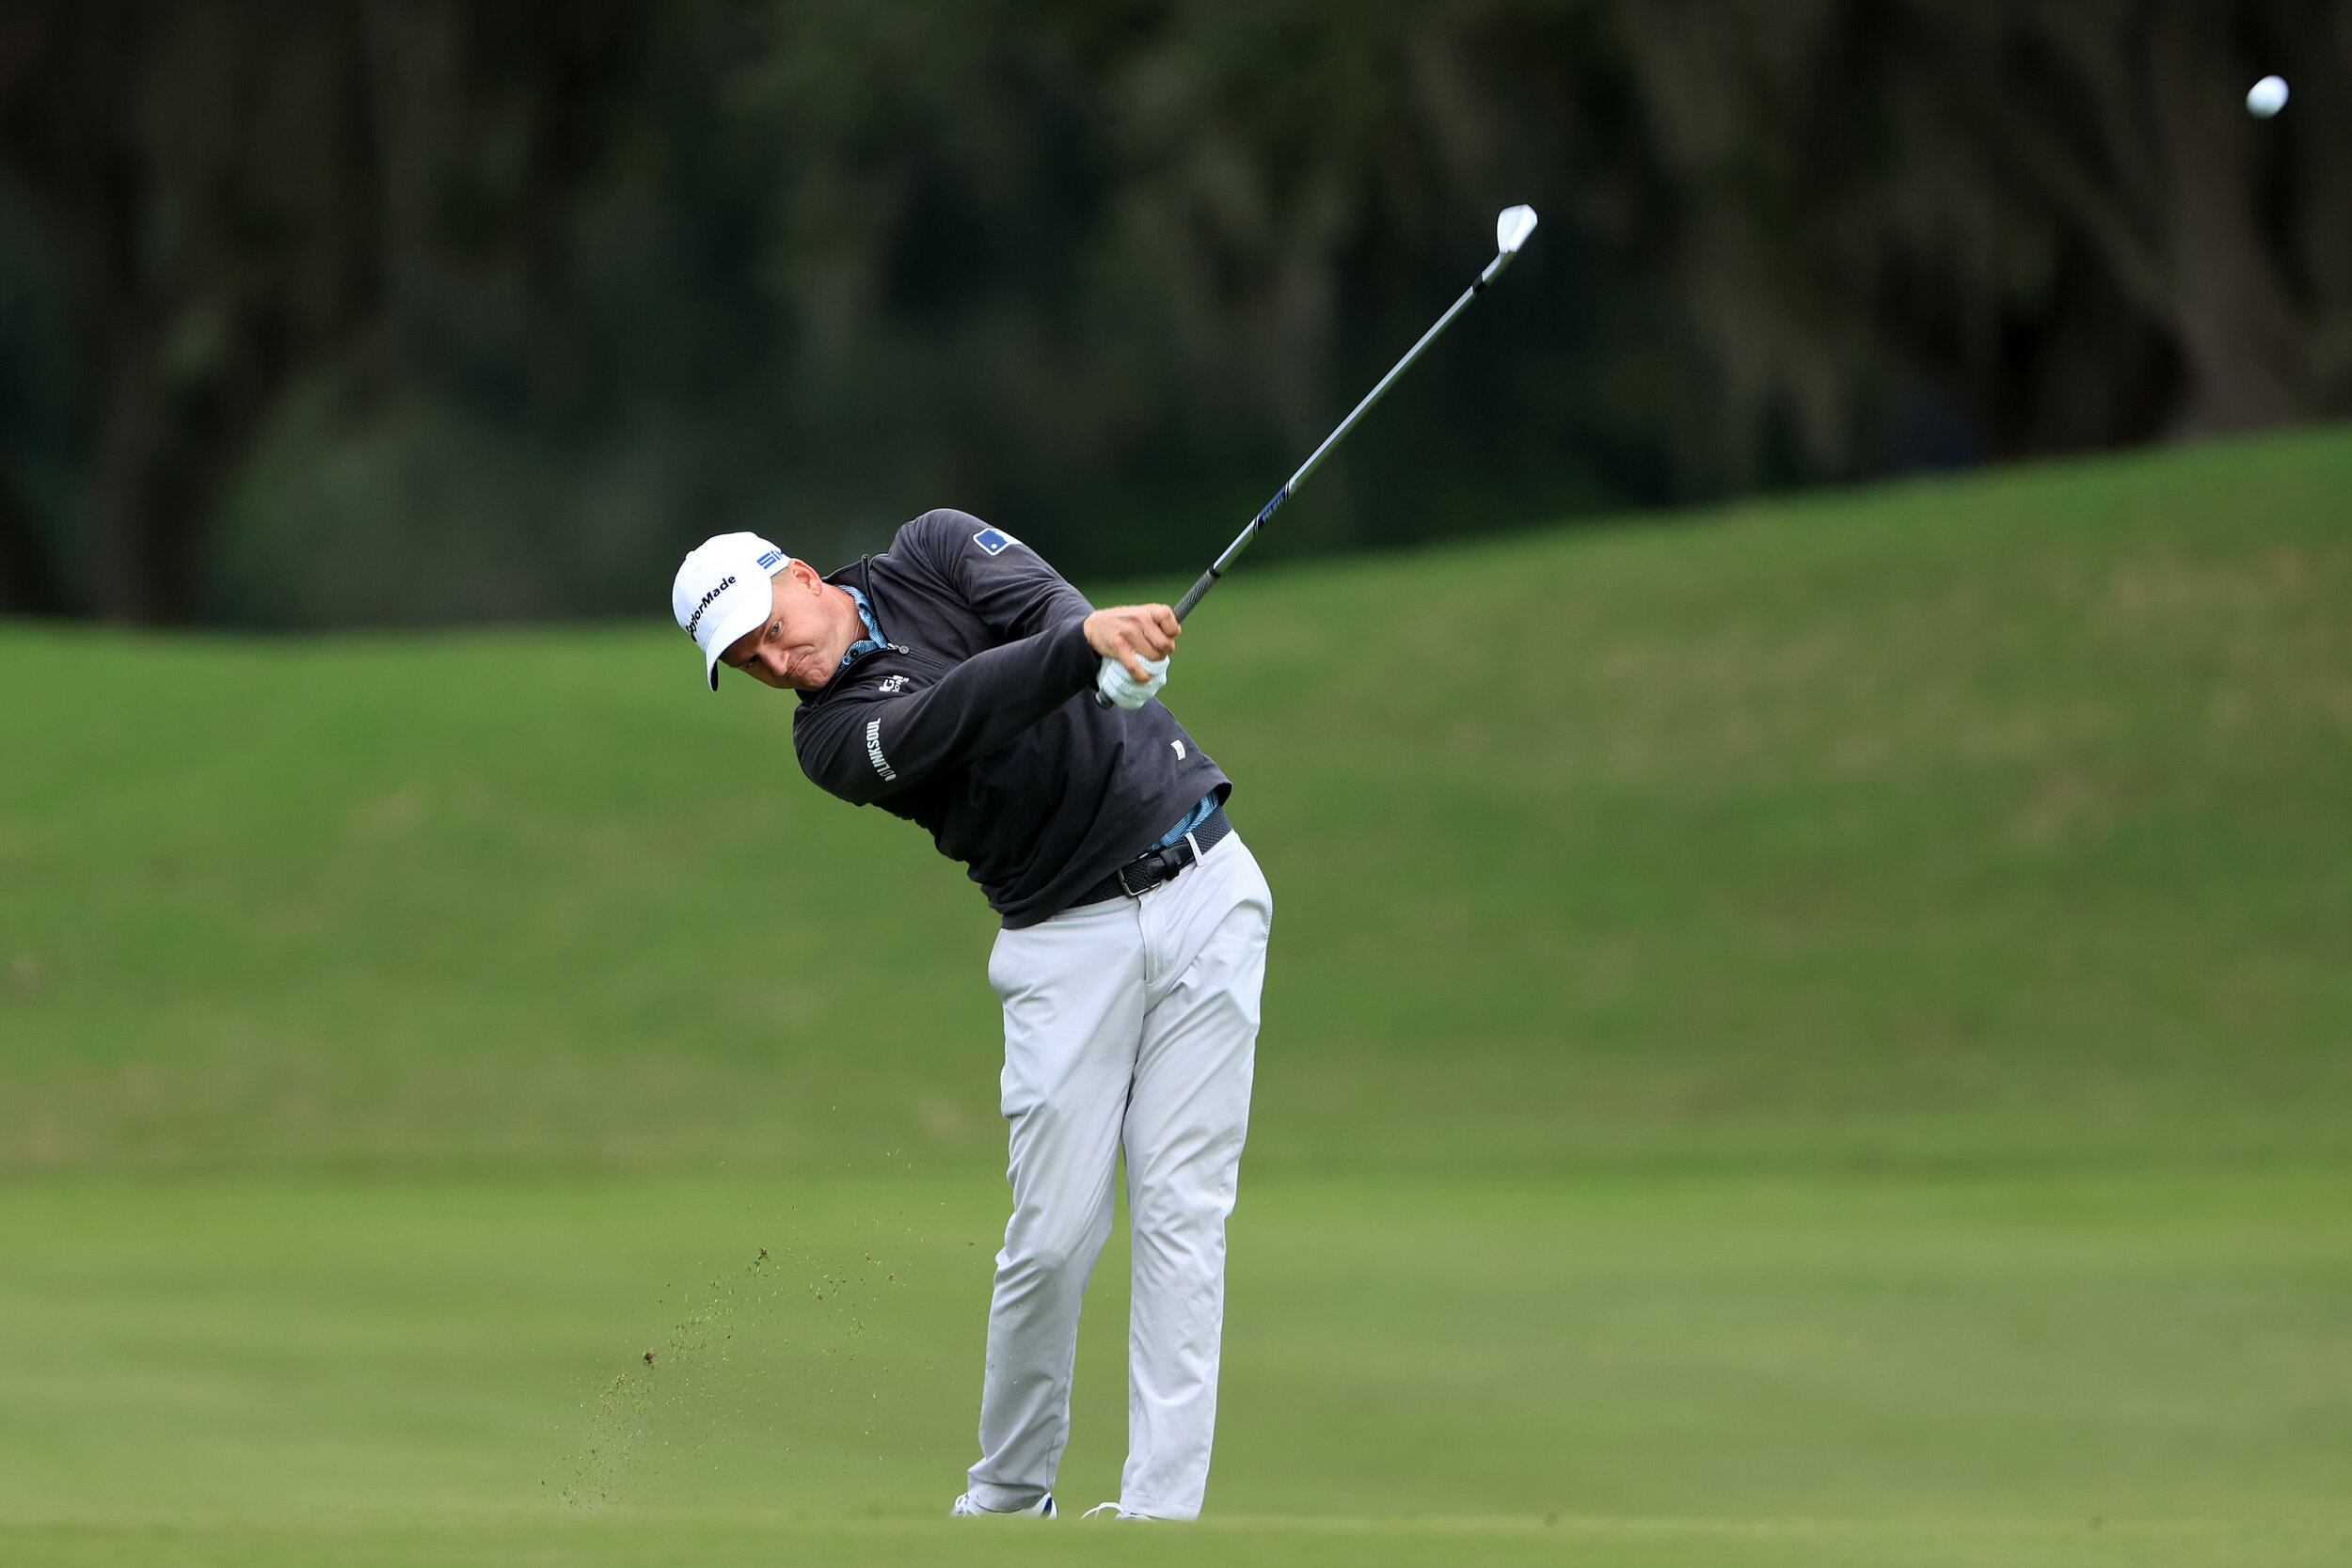  ST SIMONS ISLAND, GEORGIA - NOVEMBER 19: Adam Long of the United States plays an approach shot on the ninth hole during the first round of The RSM Classic at the Plantation Course at Sea Island Golf Club on November 19, 2020 in St Simons Island, Geo